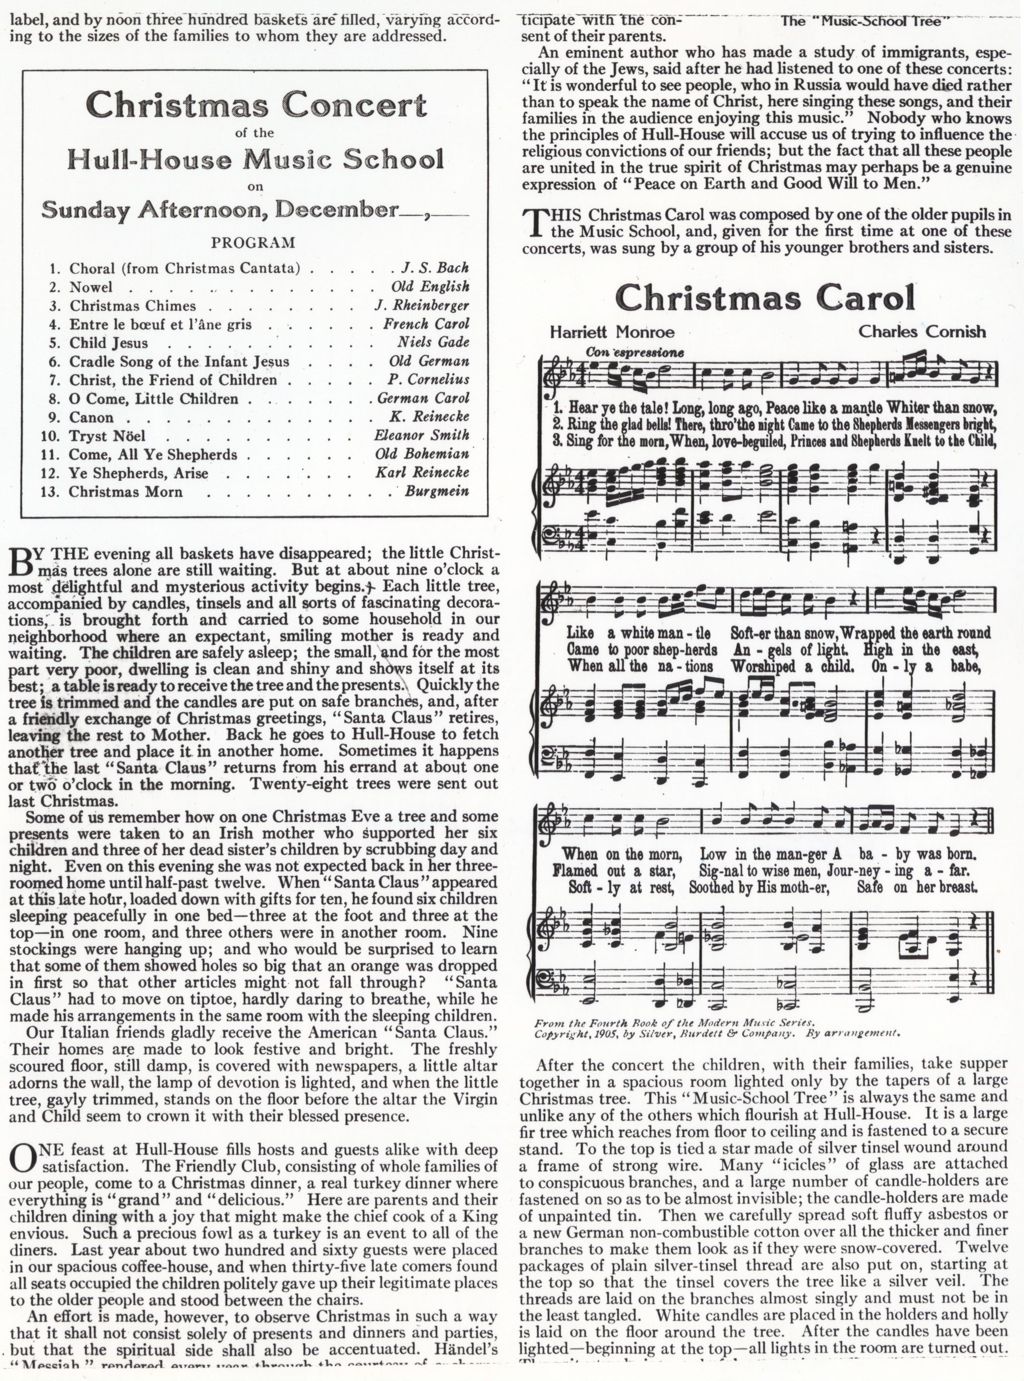 Miniature of Page from "Christmas at Hull-House" article with score for Christmas carol